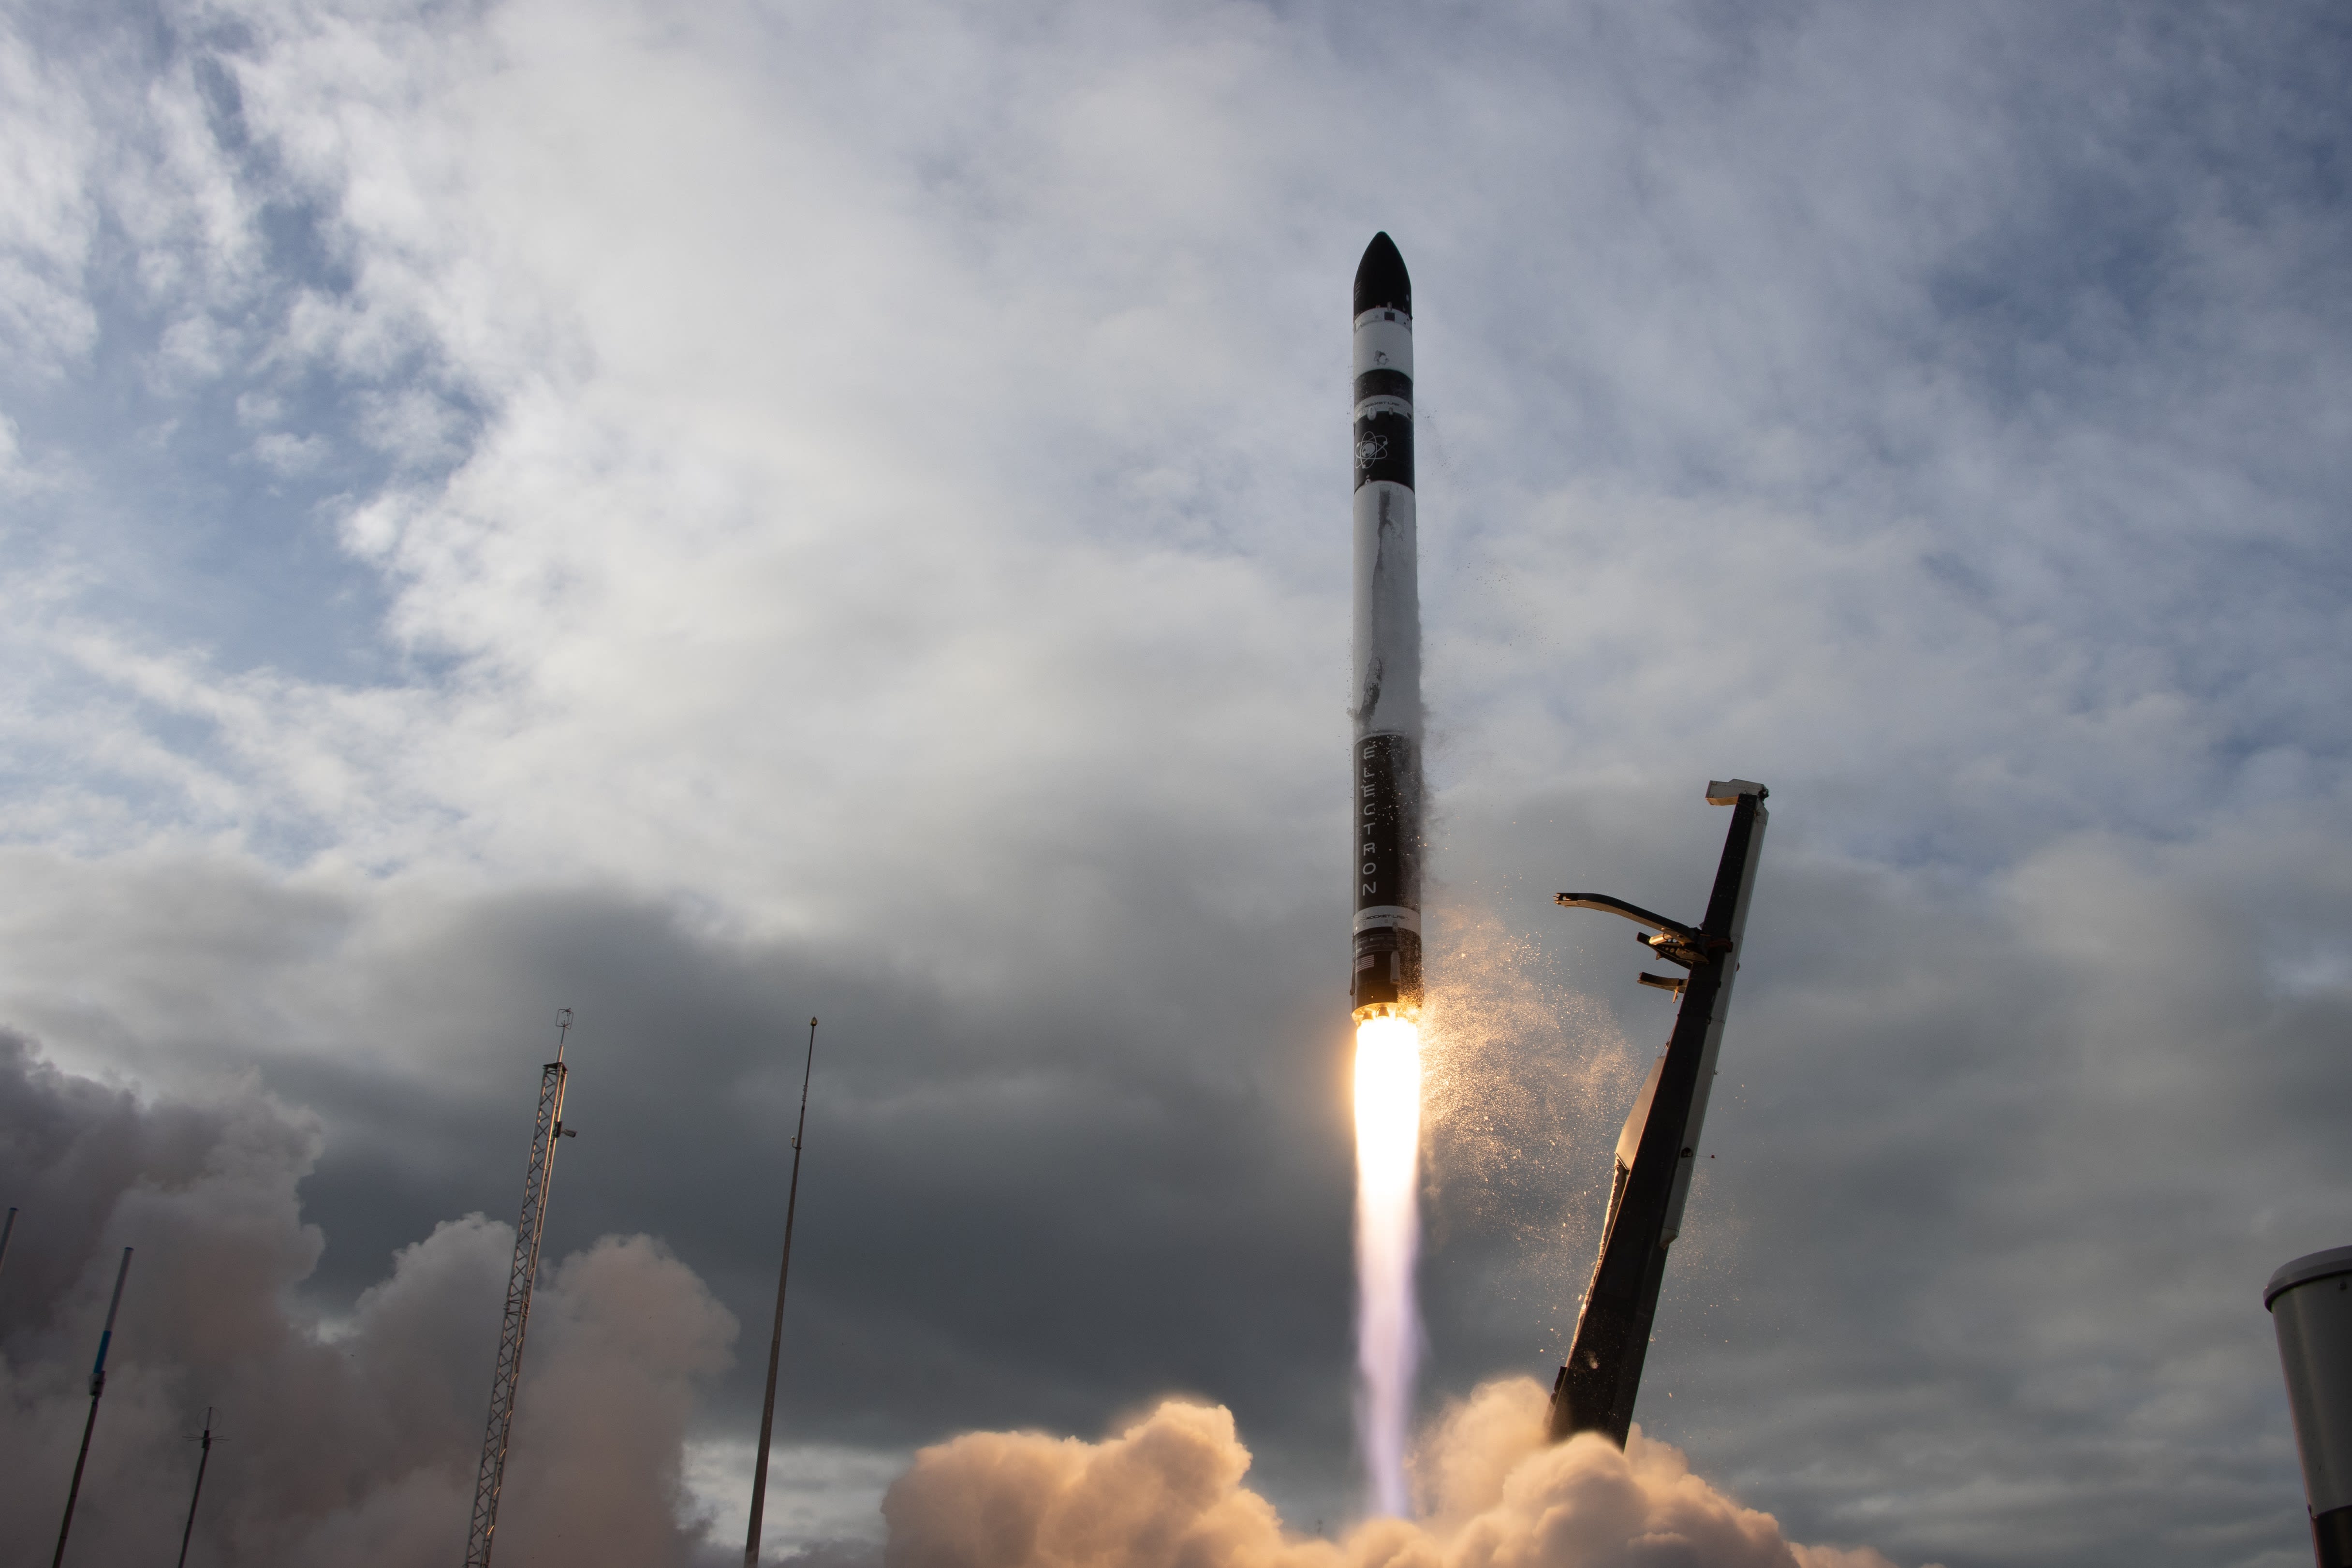 FAA approves Rocket Lab to resume launches after July failure